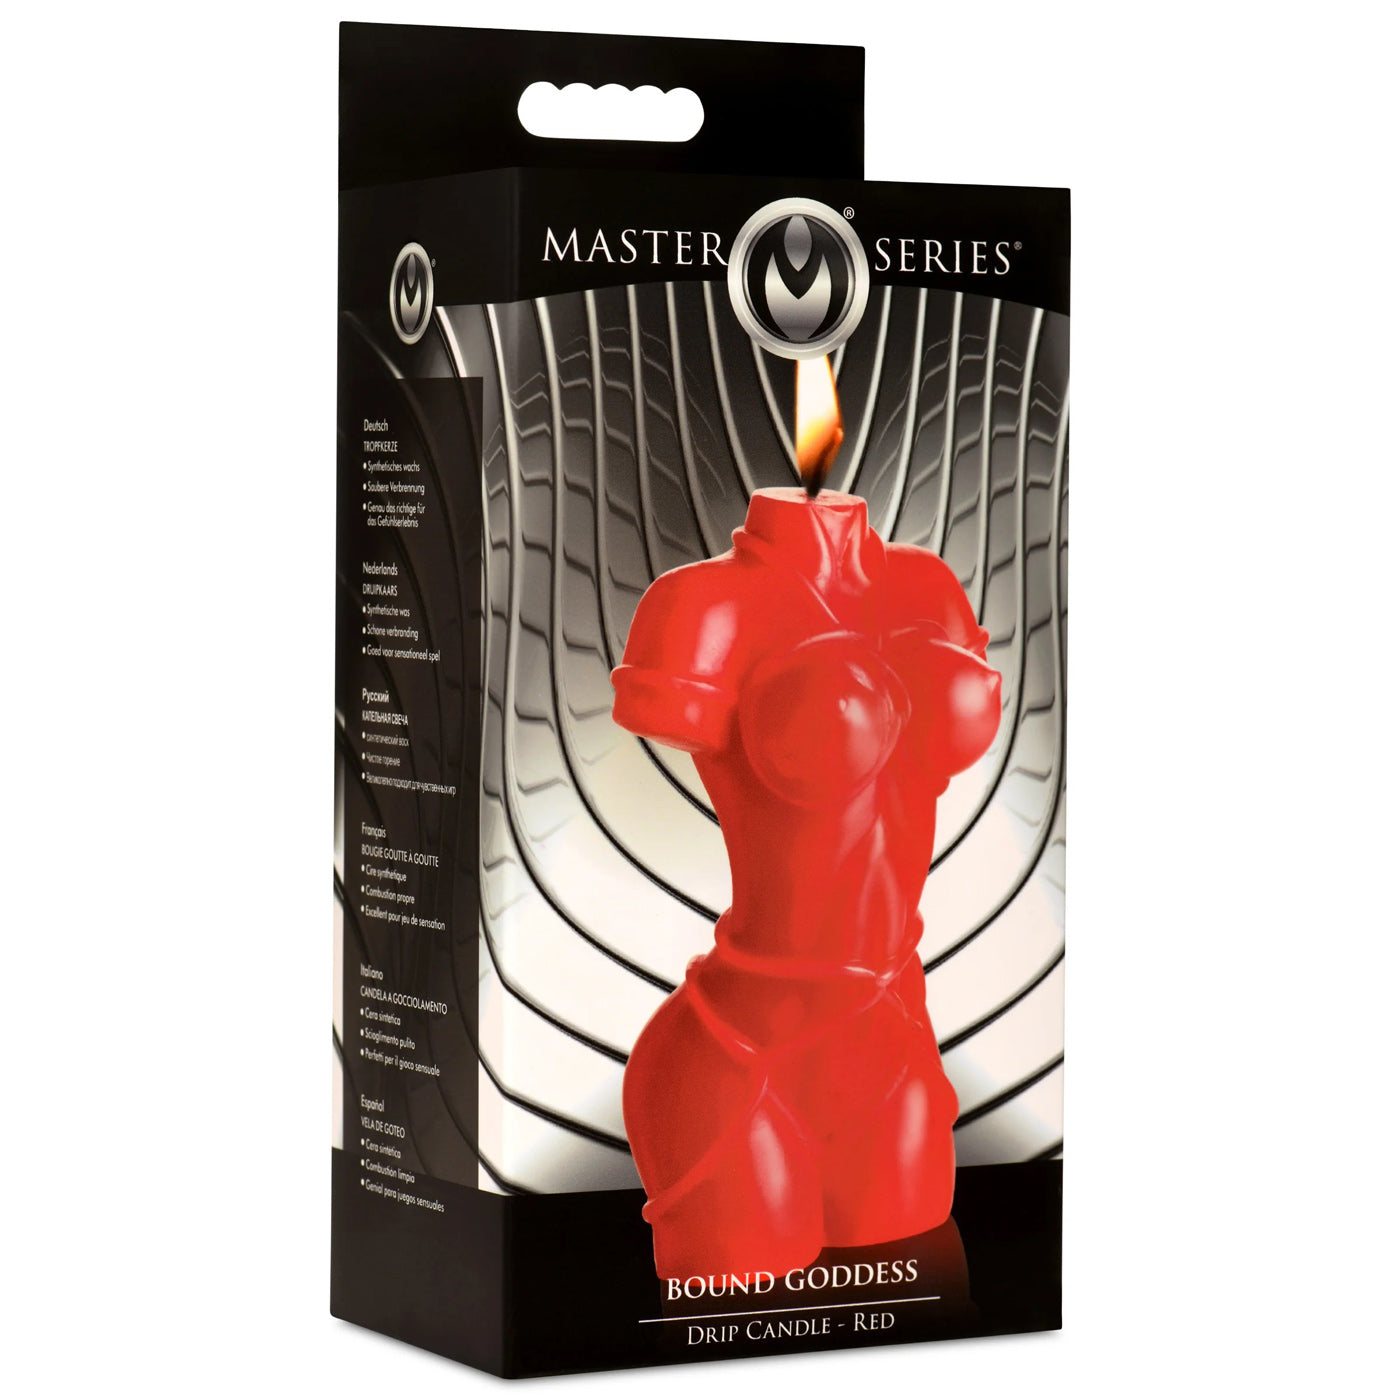 Bound Goddess Drip Candle - Red-2